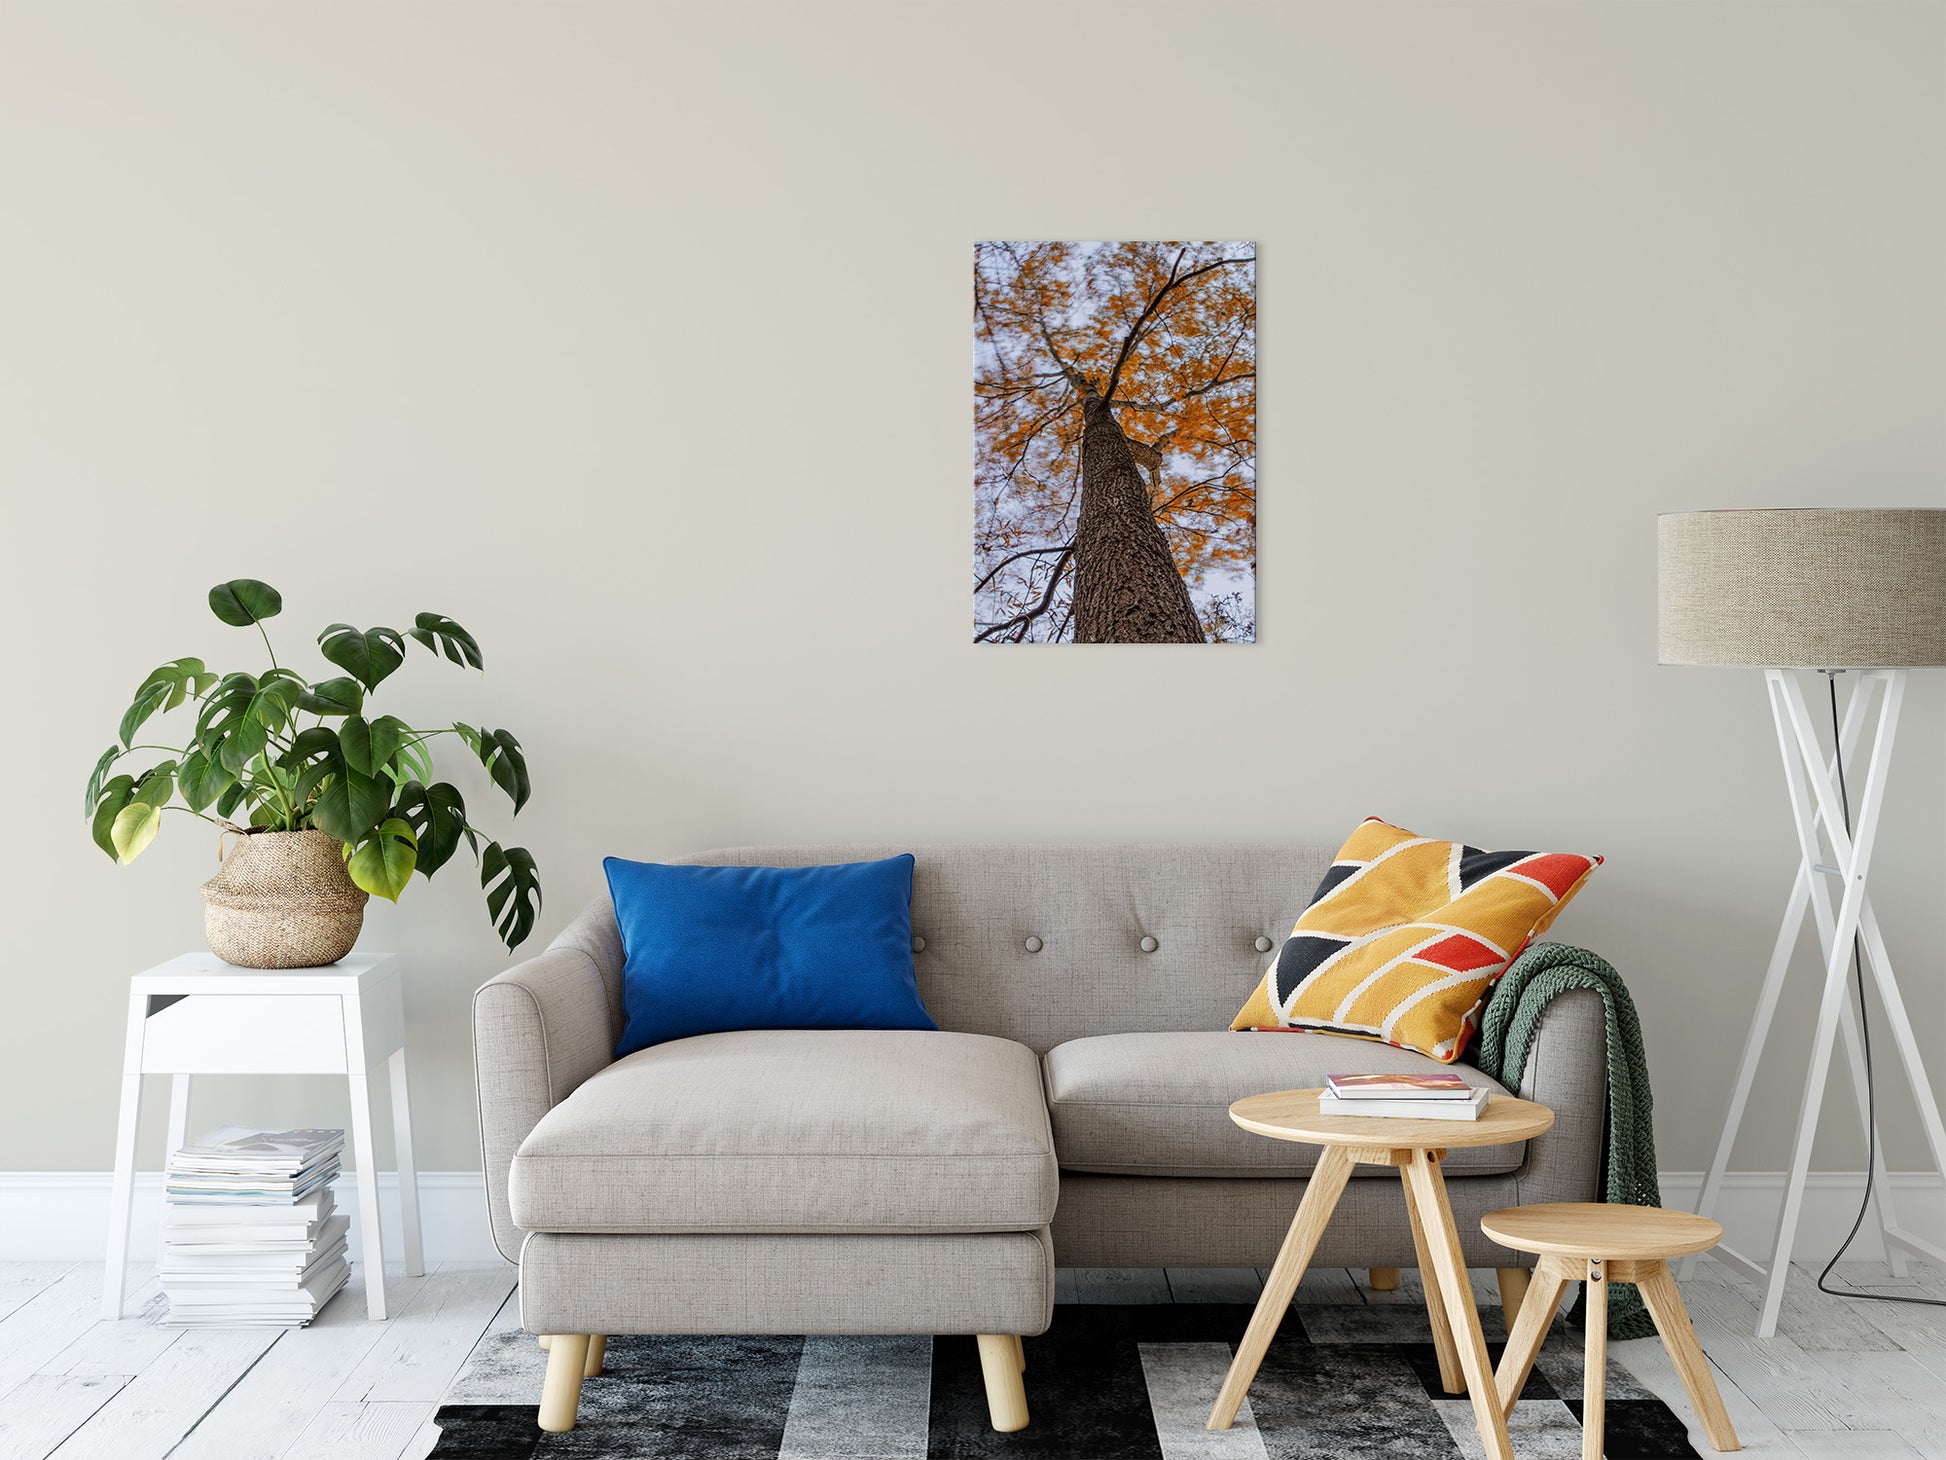 Wind in the Trees Botanical / Nature Photo Fine Art Canvas Wall Art Prints 20" x 30" - PIPAFINEART